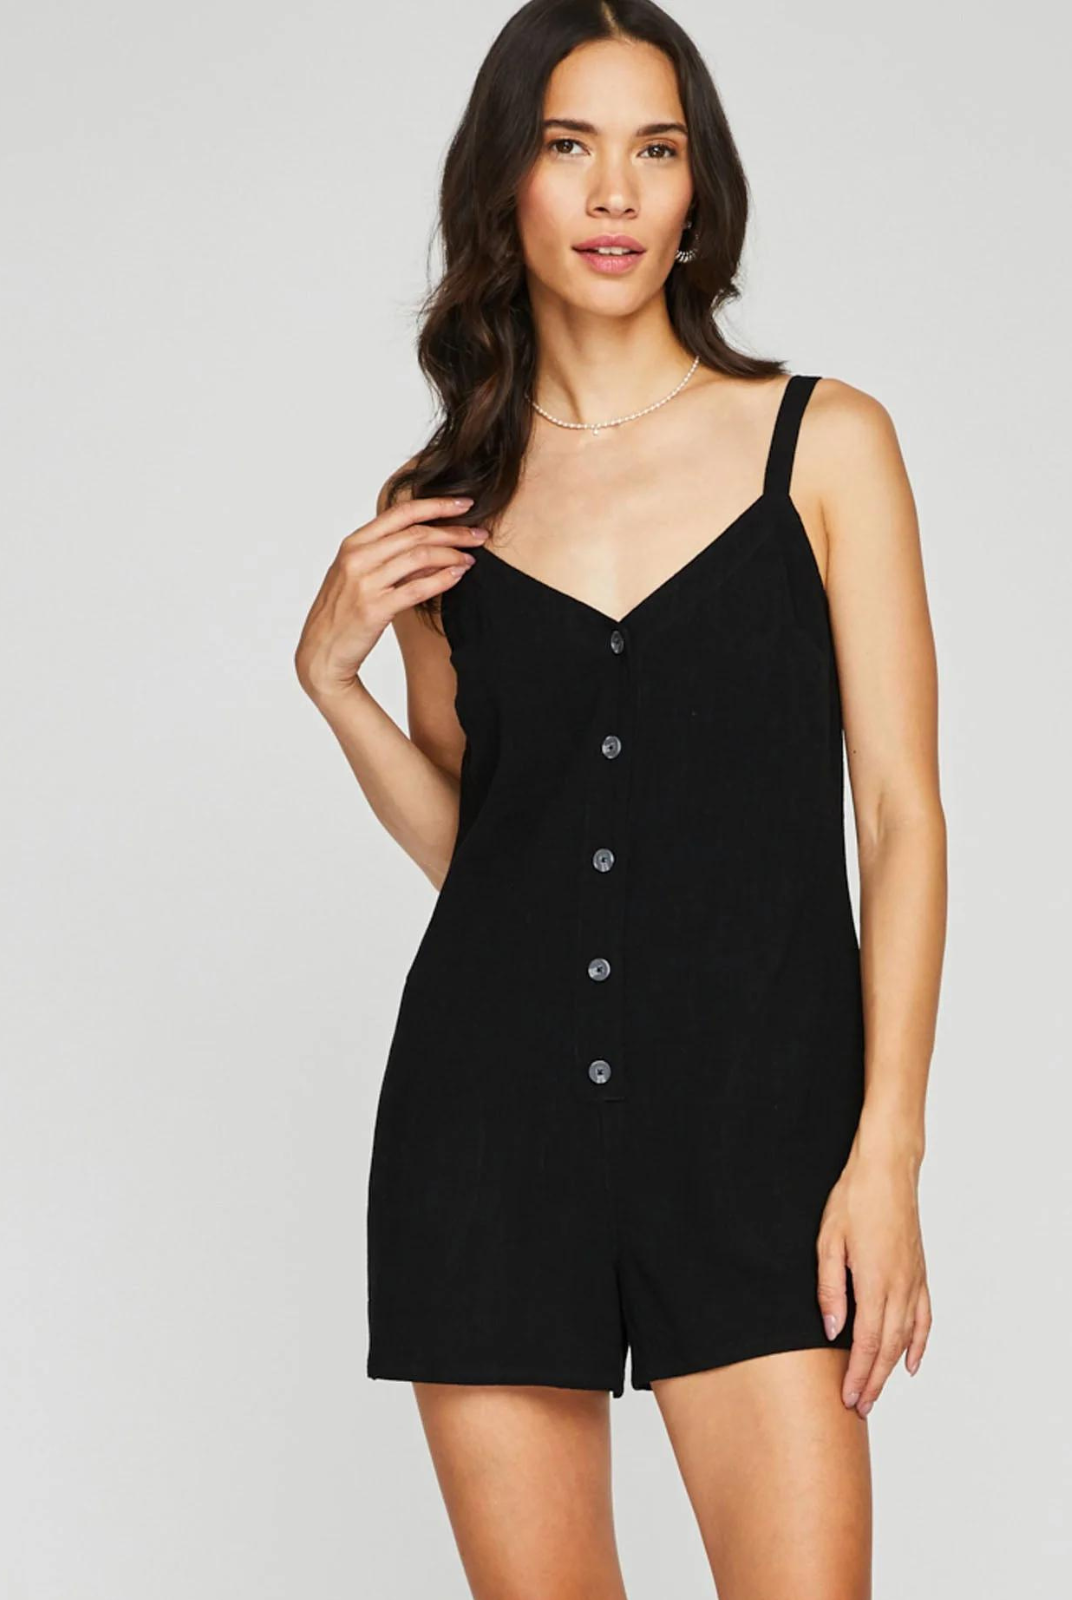 The Harper romper is made of a linen blend for an effortless look and feel. Features include a functional button placket, adjustable straps, and side seam pockets.